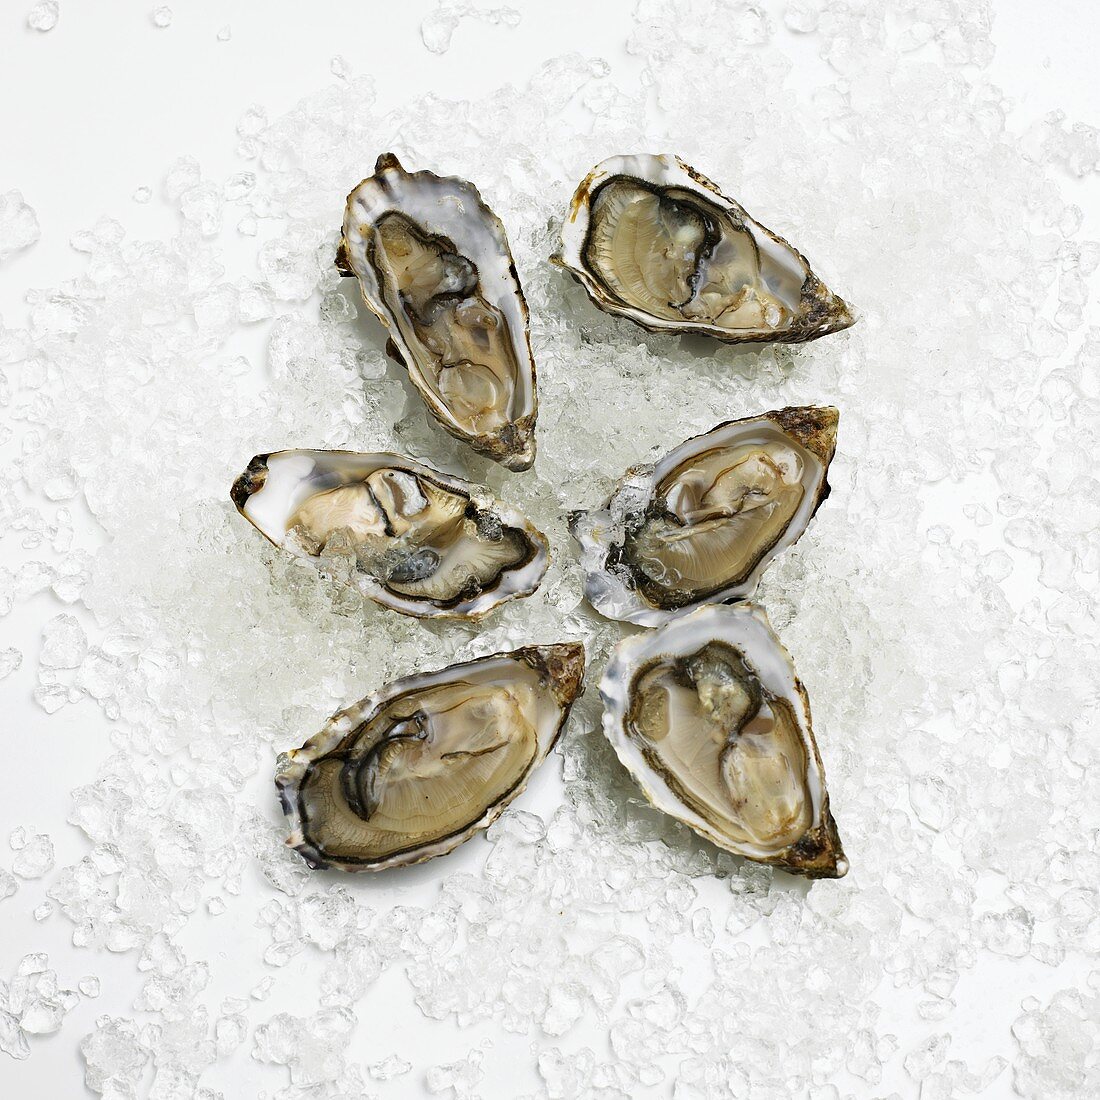 Opened oysters on crushed ice